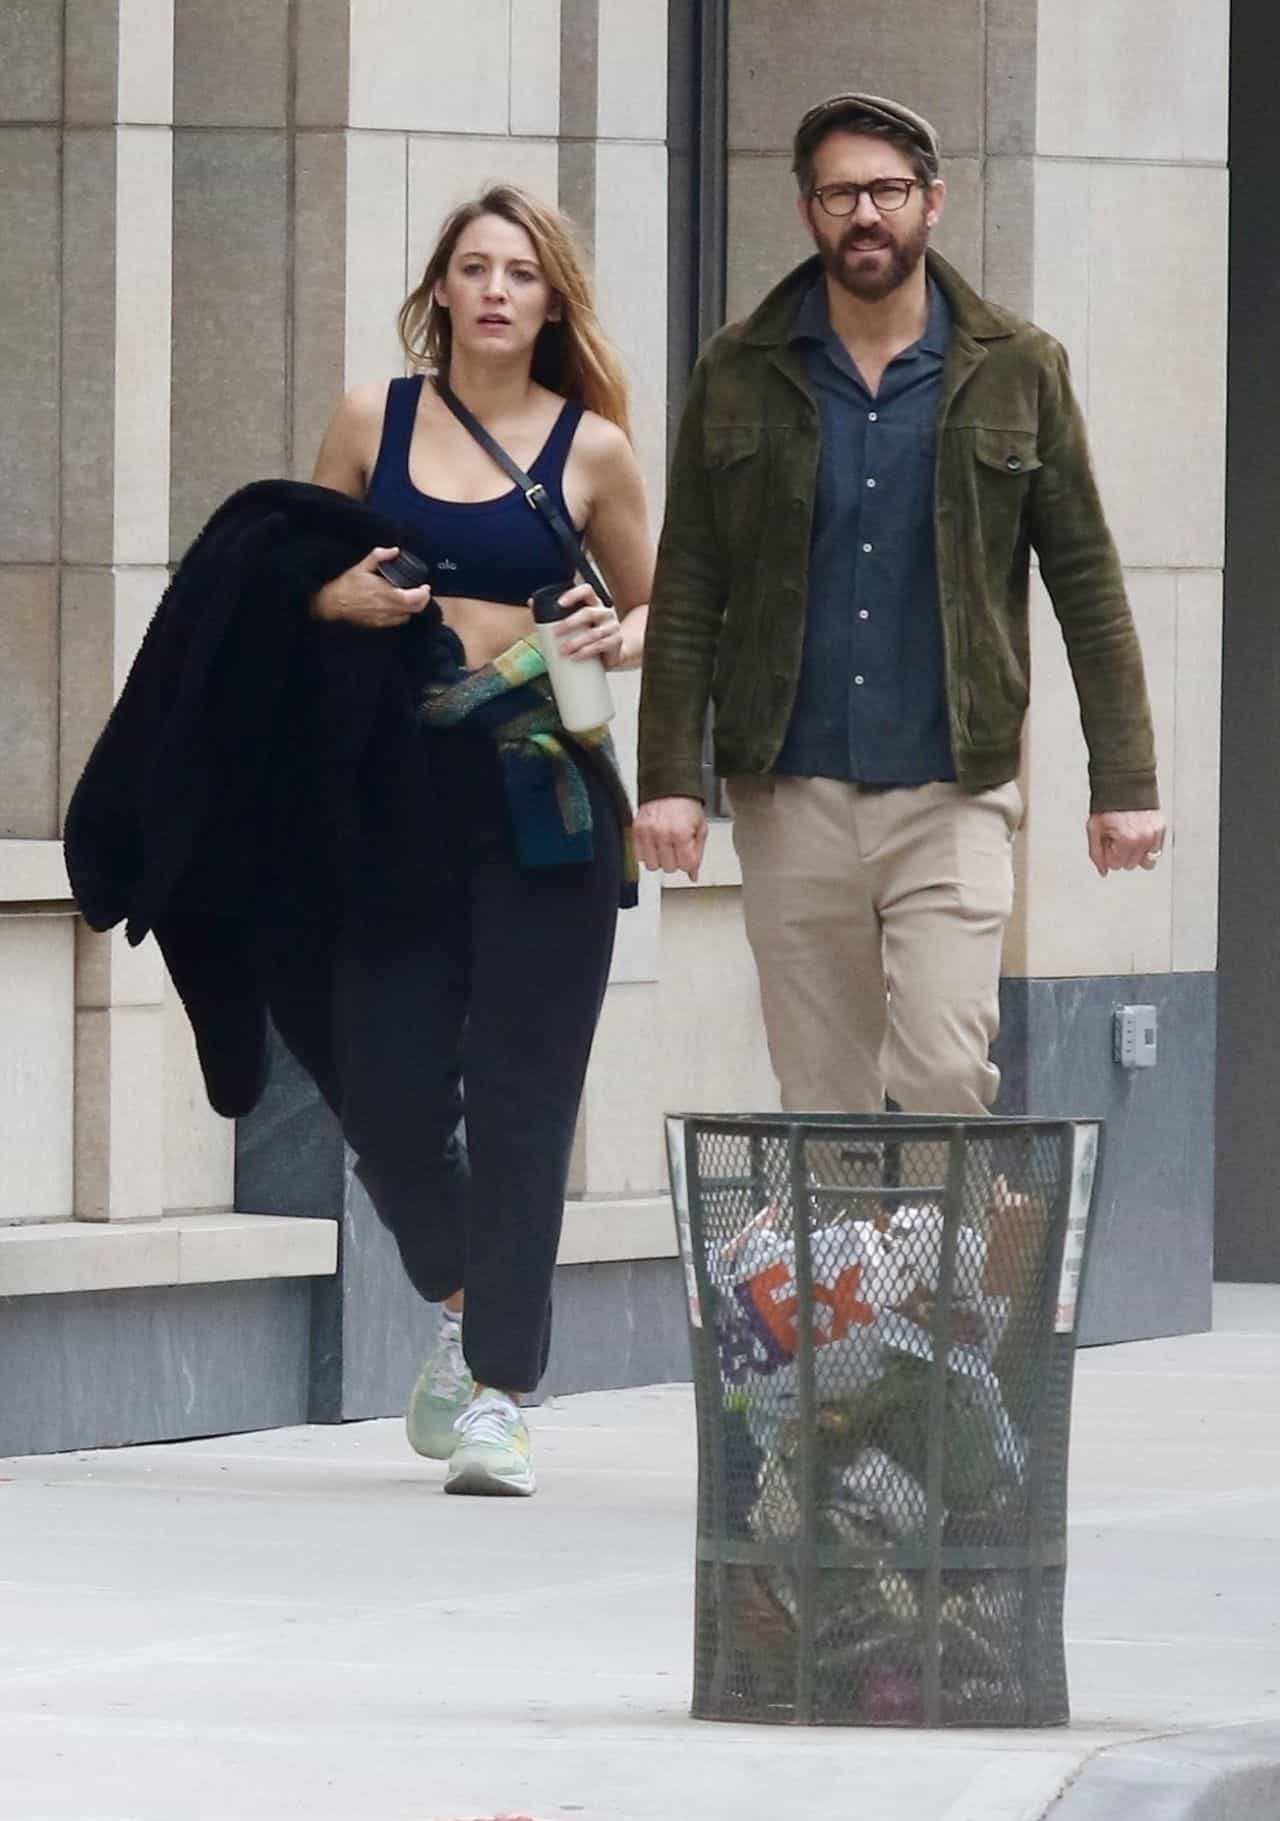 Blake Lively Wore a Sports Bra as She Walked with Ryan Reynolds After Gym